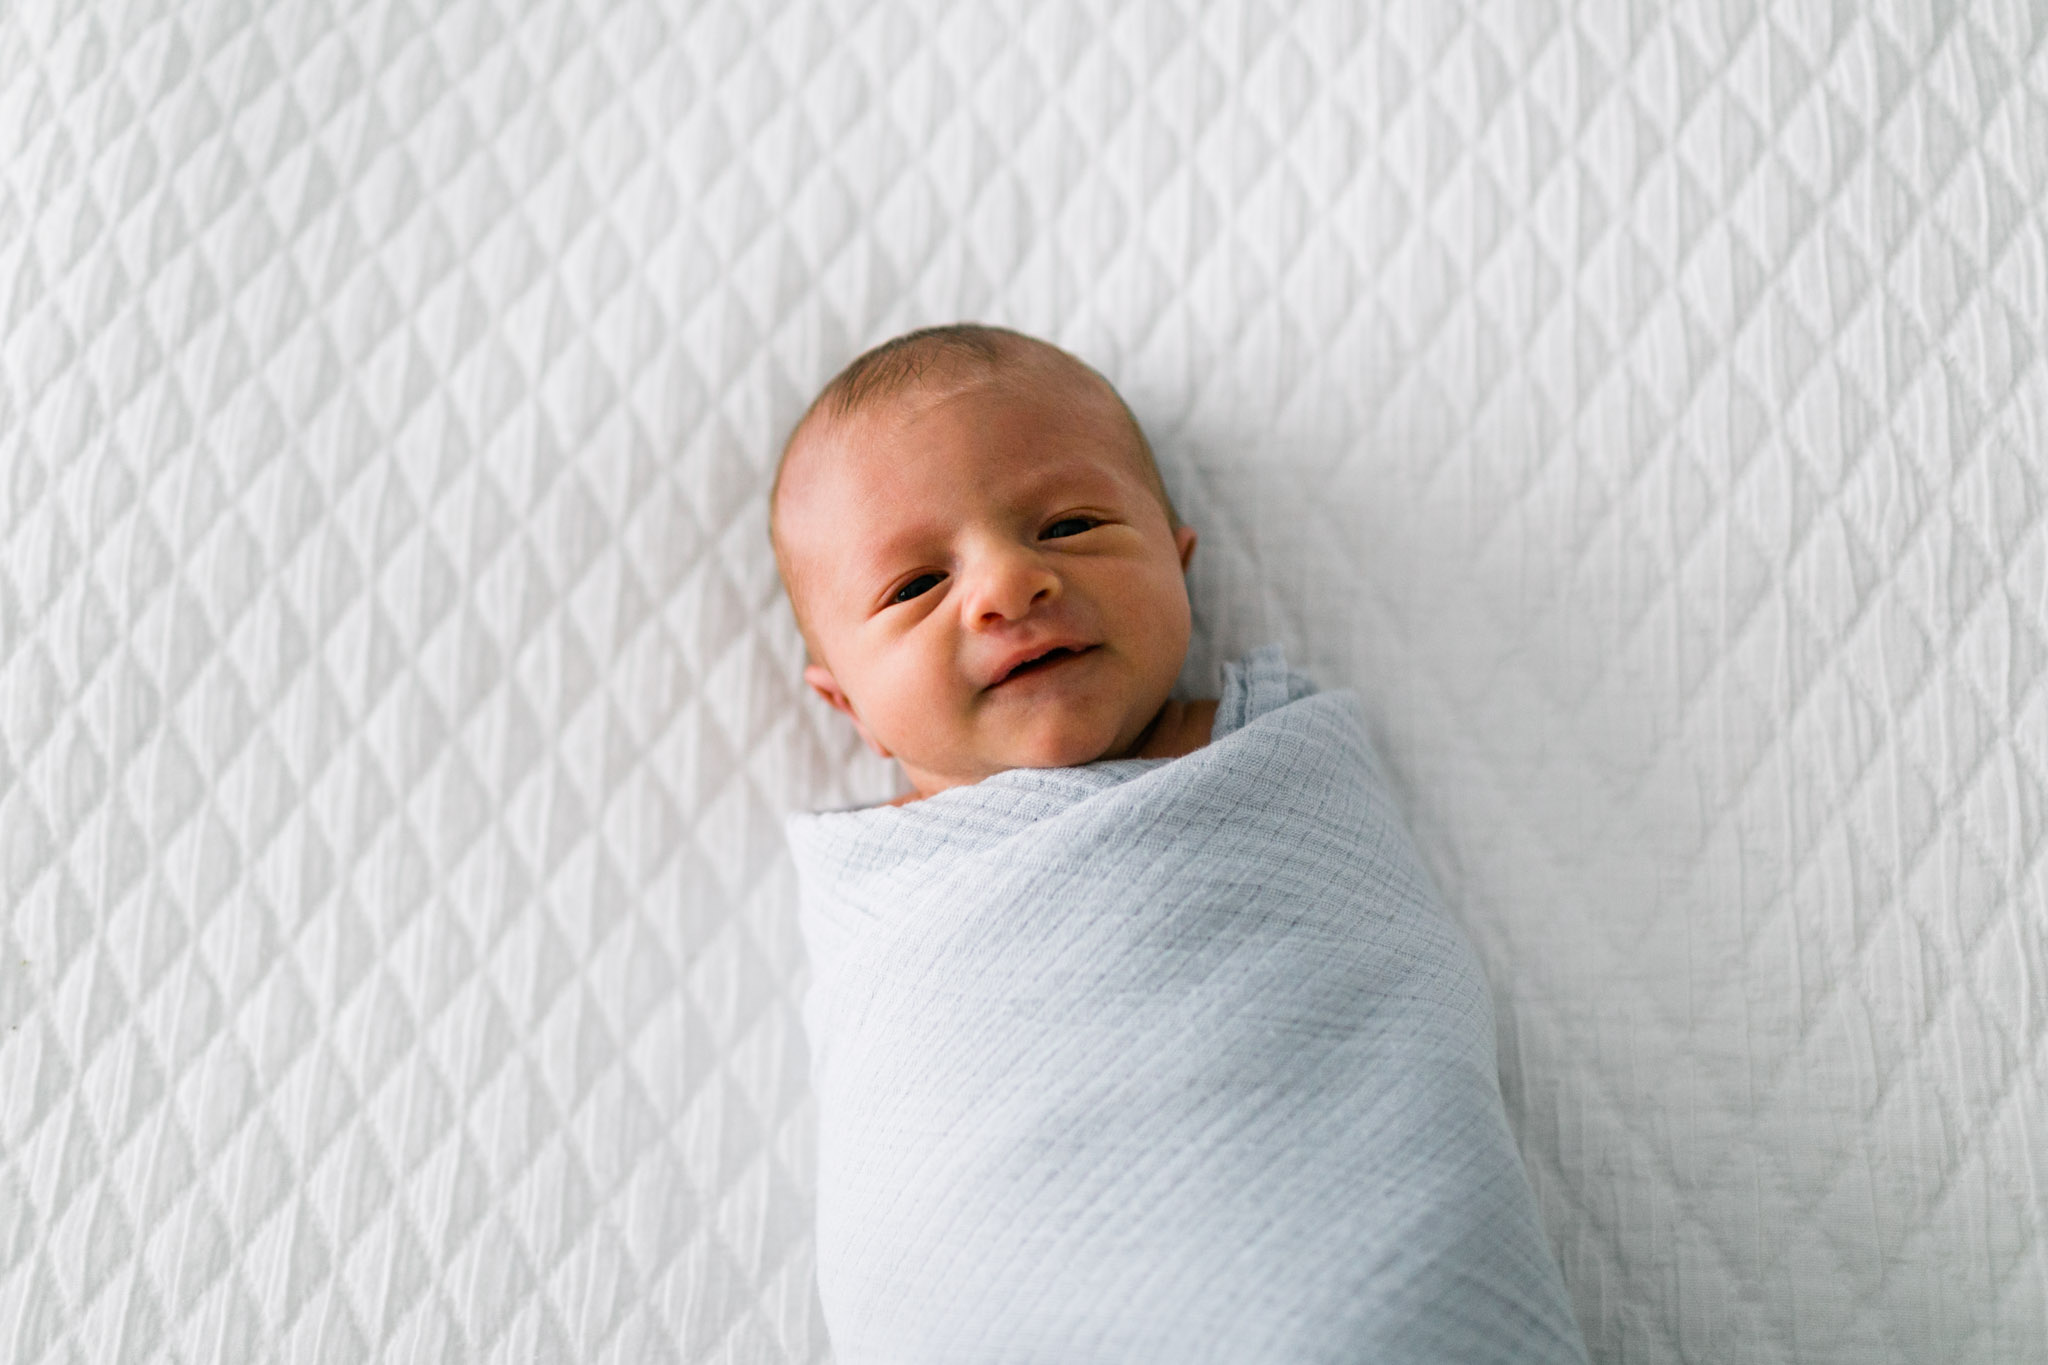 Baby boy on white bed smiling | Durham Newborn Photographer | By G. Lin Photography